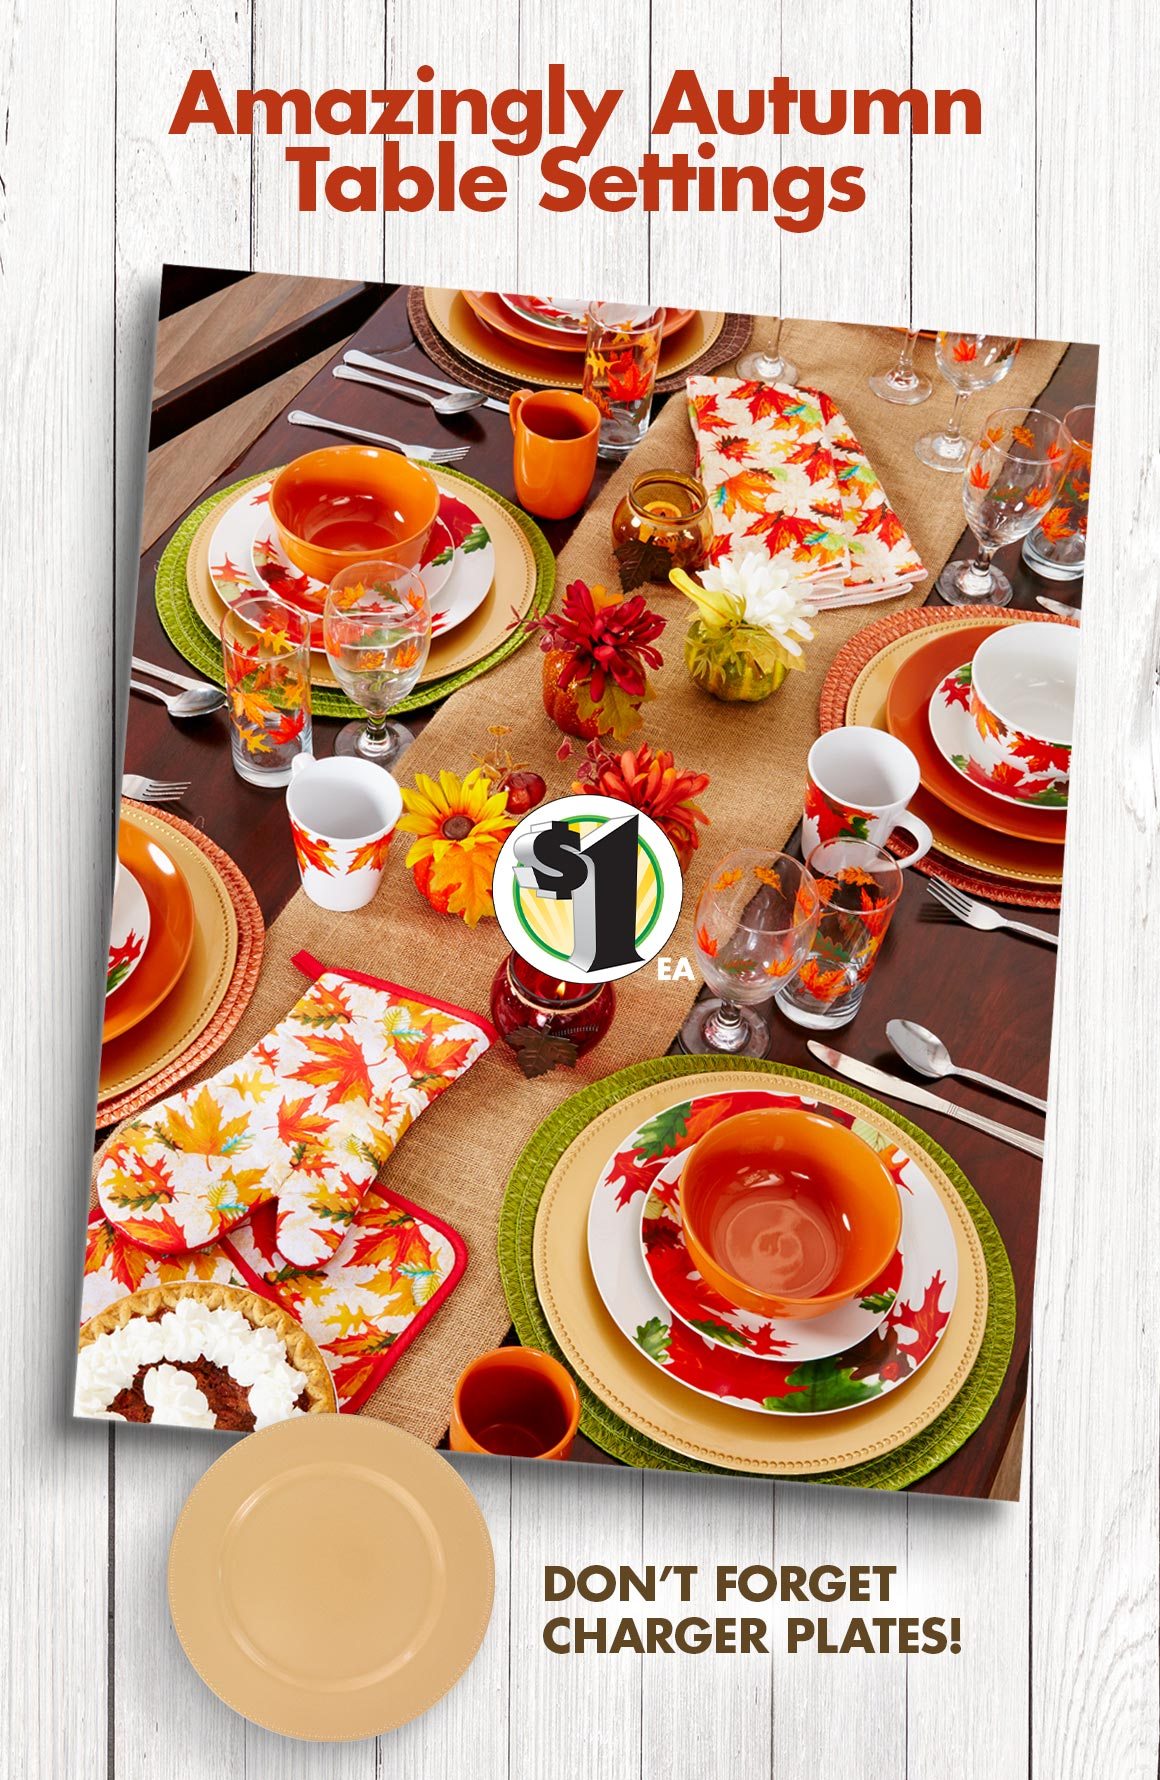 Shop Our Fall Leaves Dinnerware Collection & Fall Décor